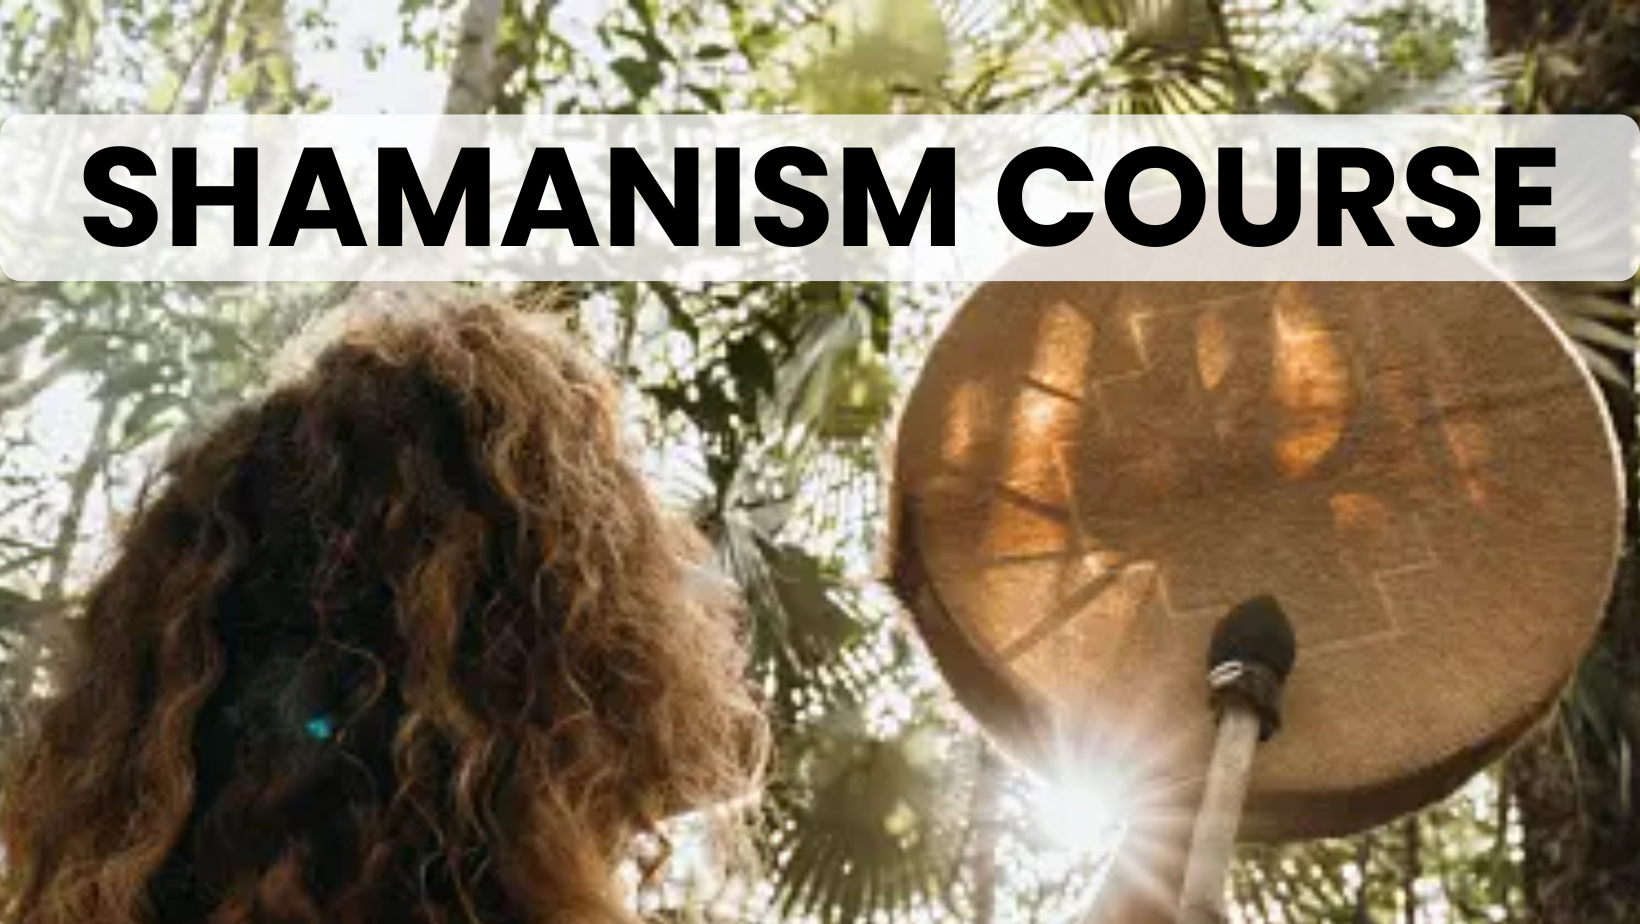 Shamanism Courses in Coimbatore